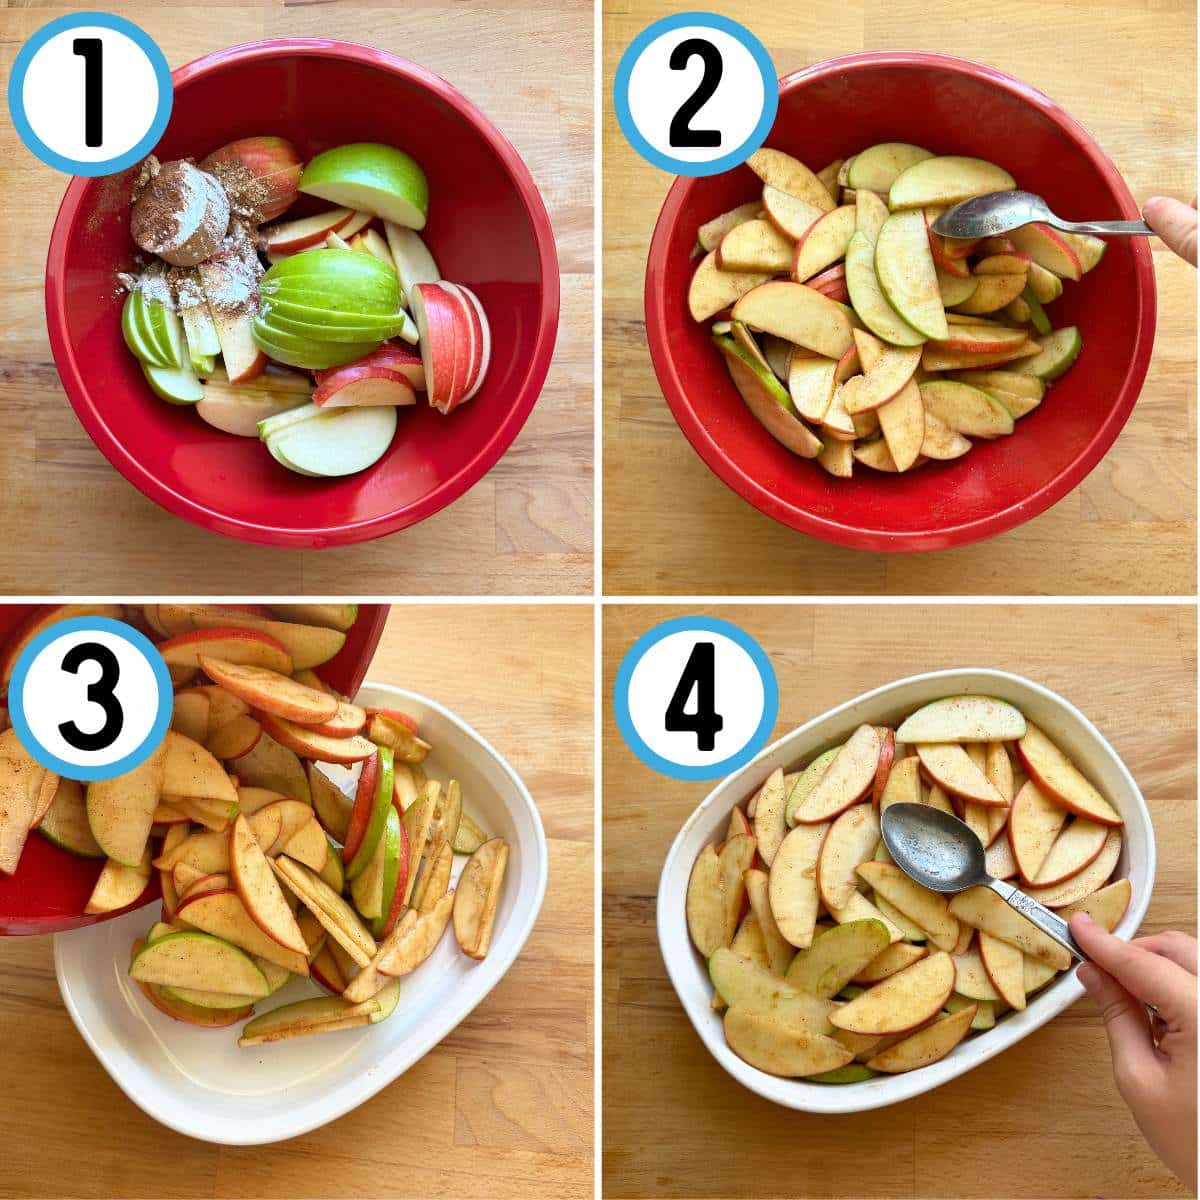 Step by step guide to making the apple filling. Step 1: Place all apple filling ingredients in a bowl. Step 2: Mix until thoroughly combined. Step 3: Place filling into a baking dish. Step 4: Spread  into an even layer with a spoon.